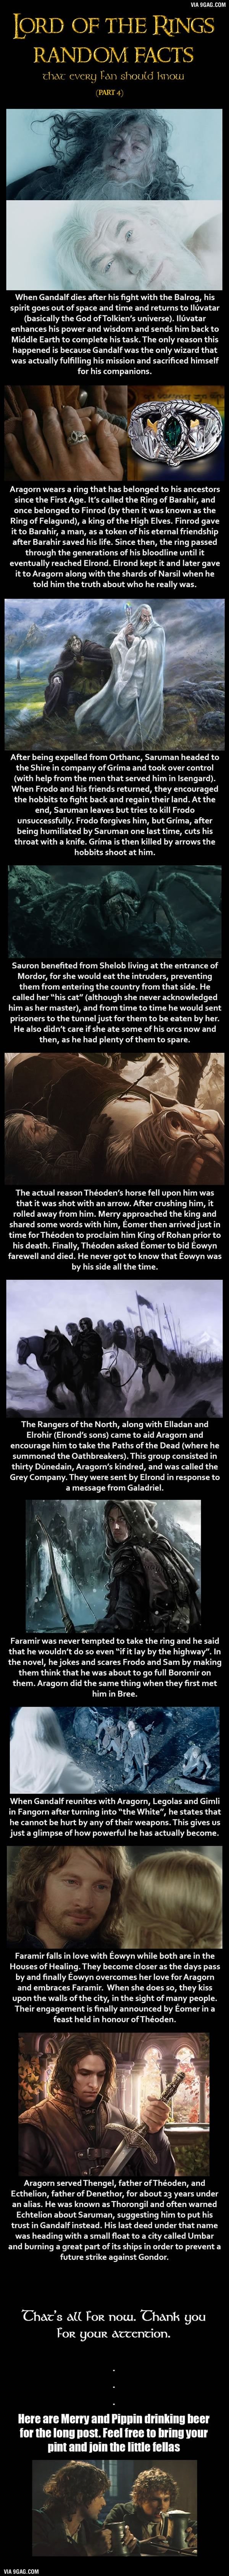 Here are some Lord of the Rings random facts (Part...